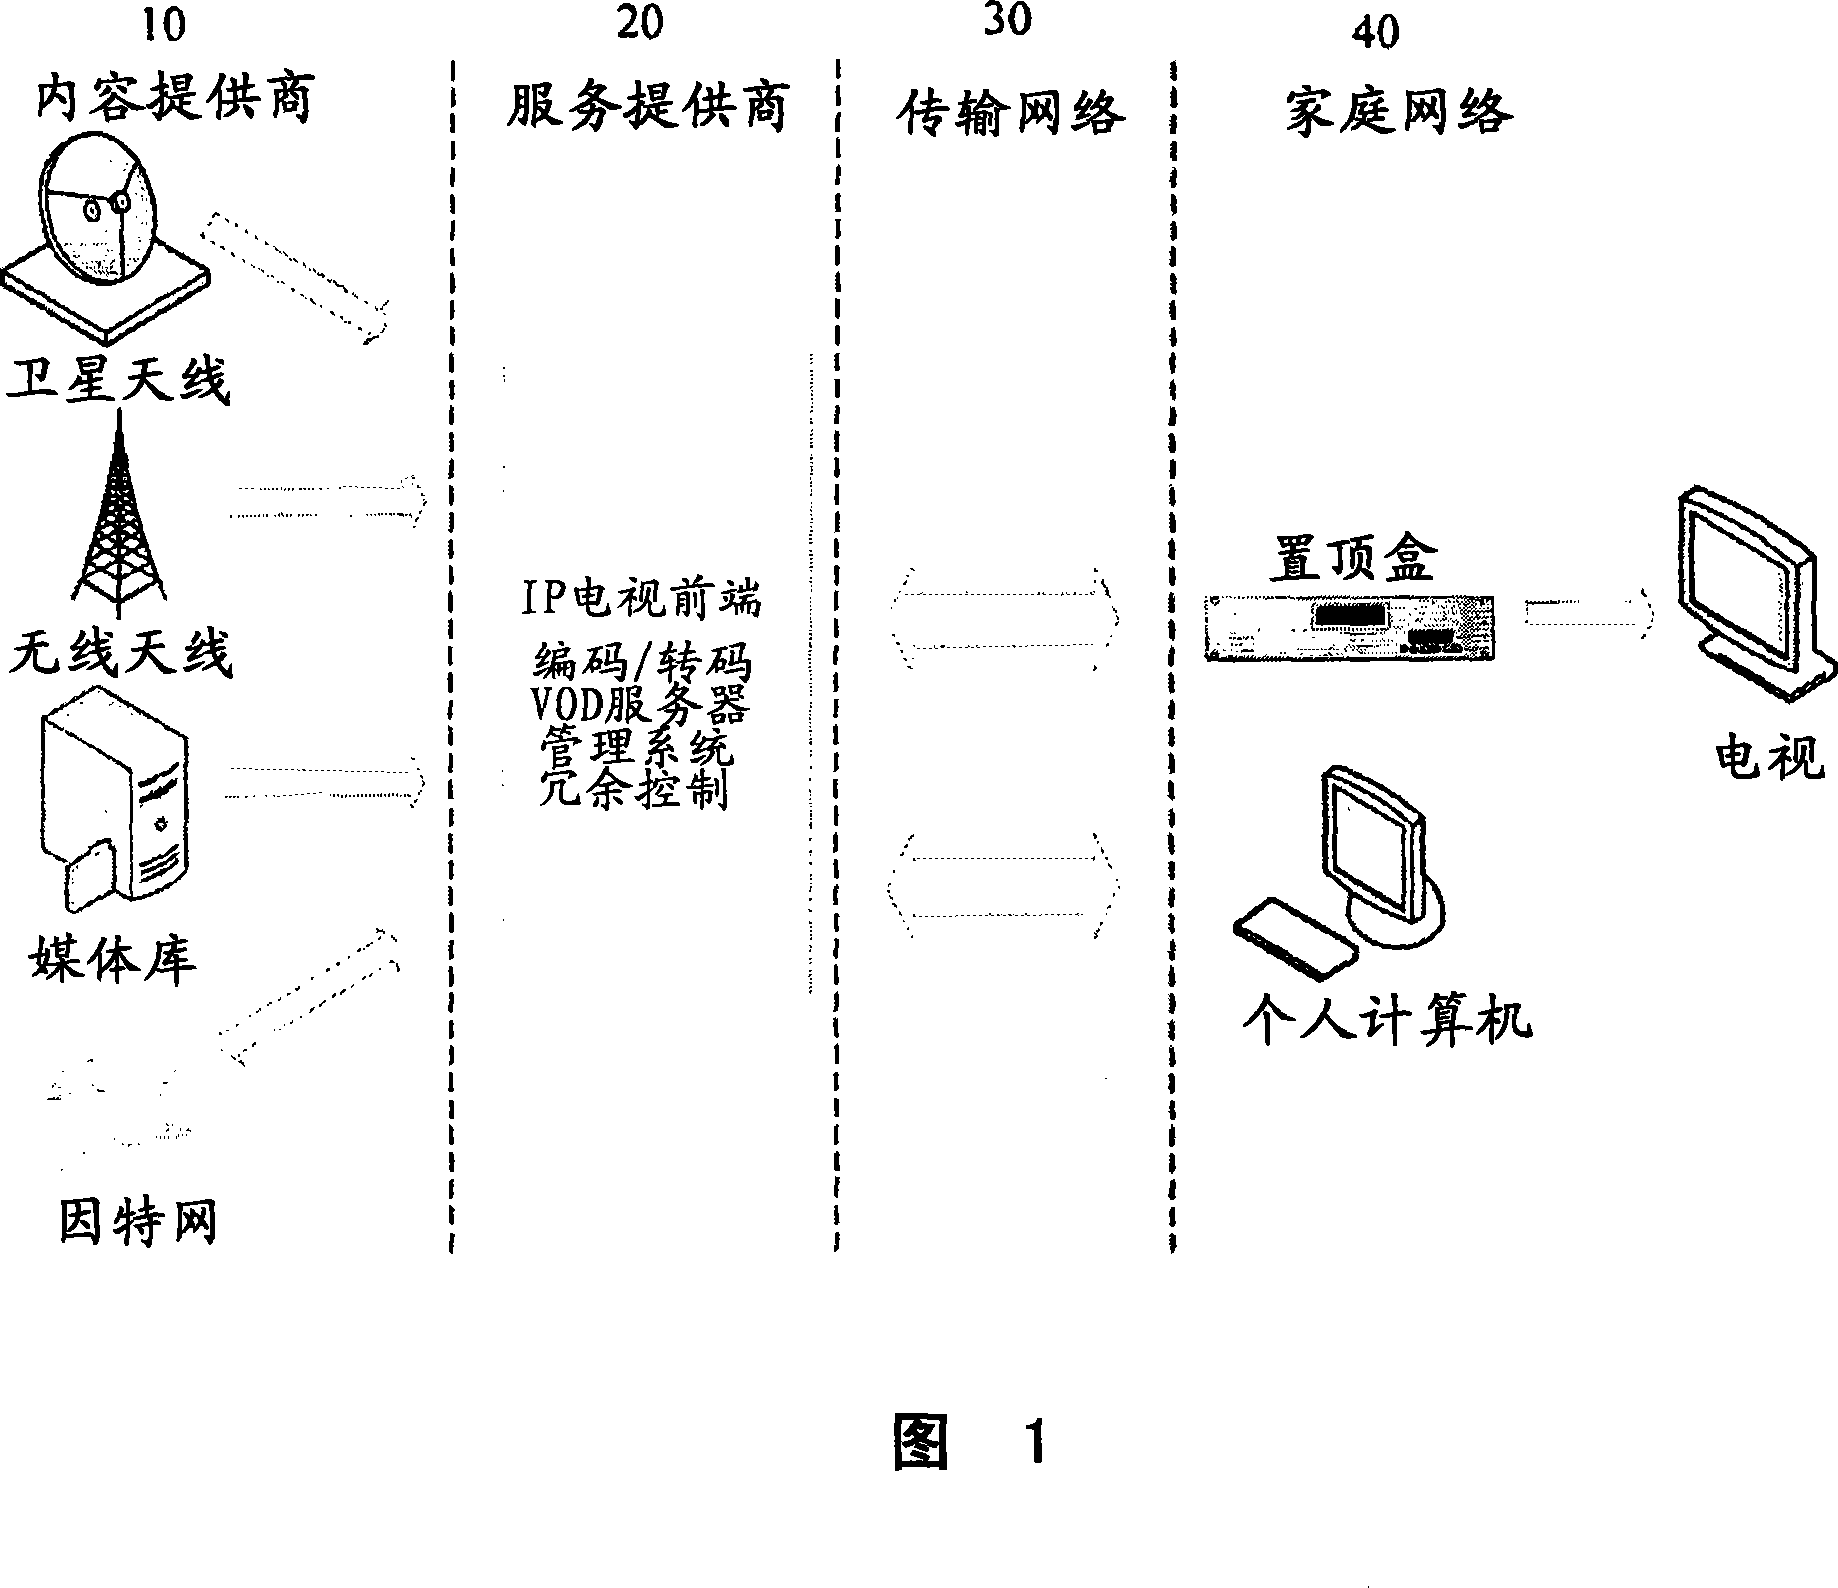 Method and apparatus for delivering consumer entertainment services accessed over an IP network